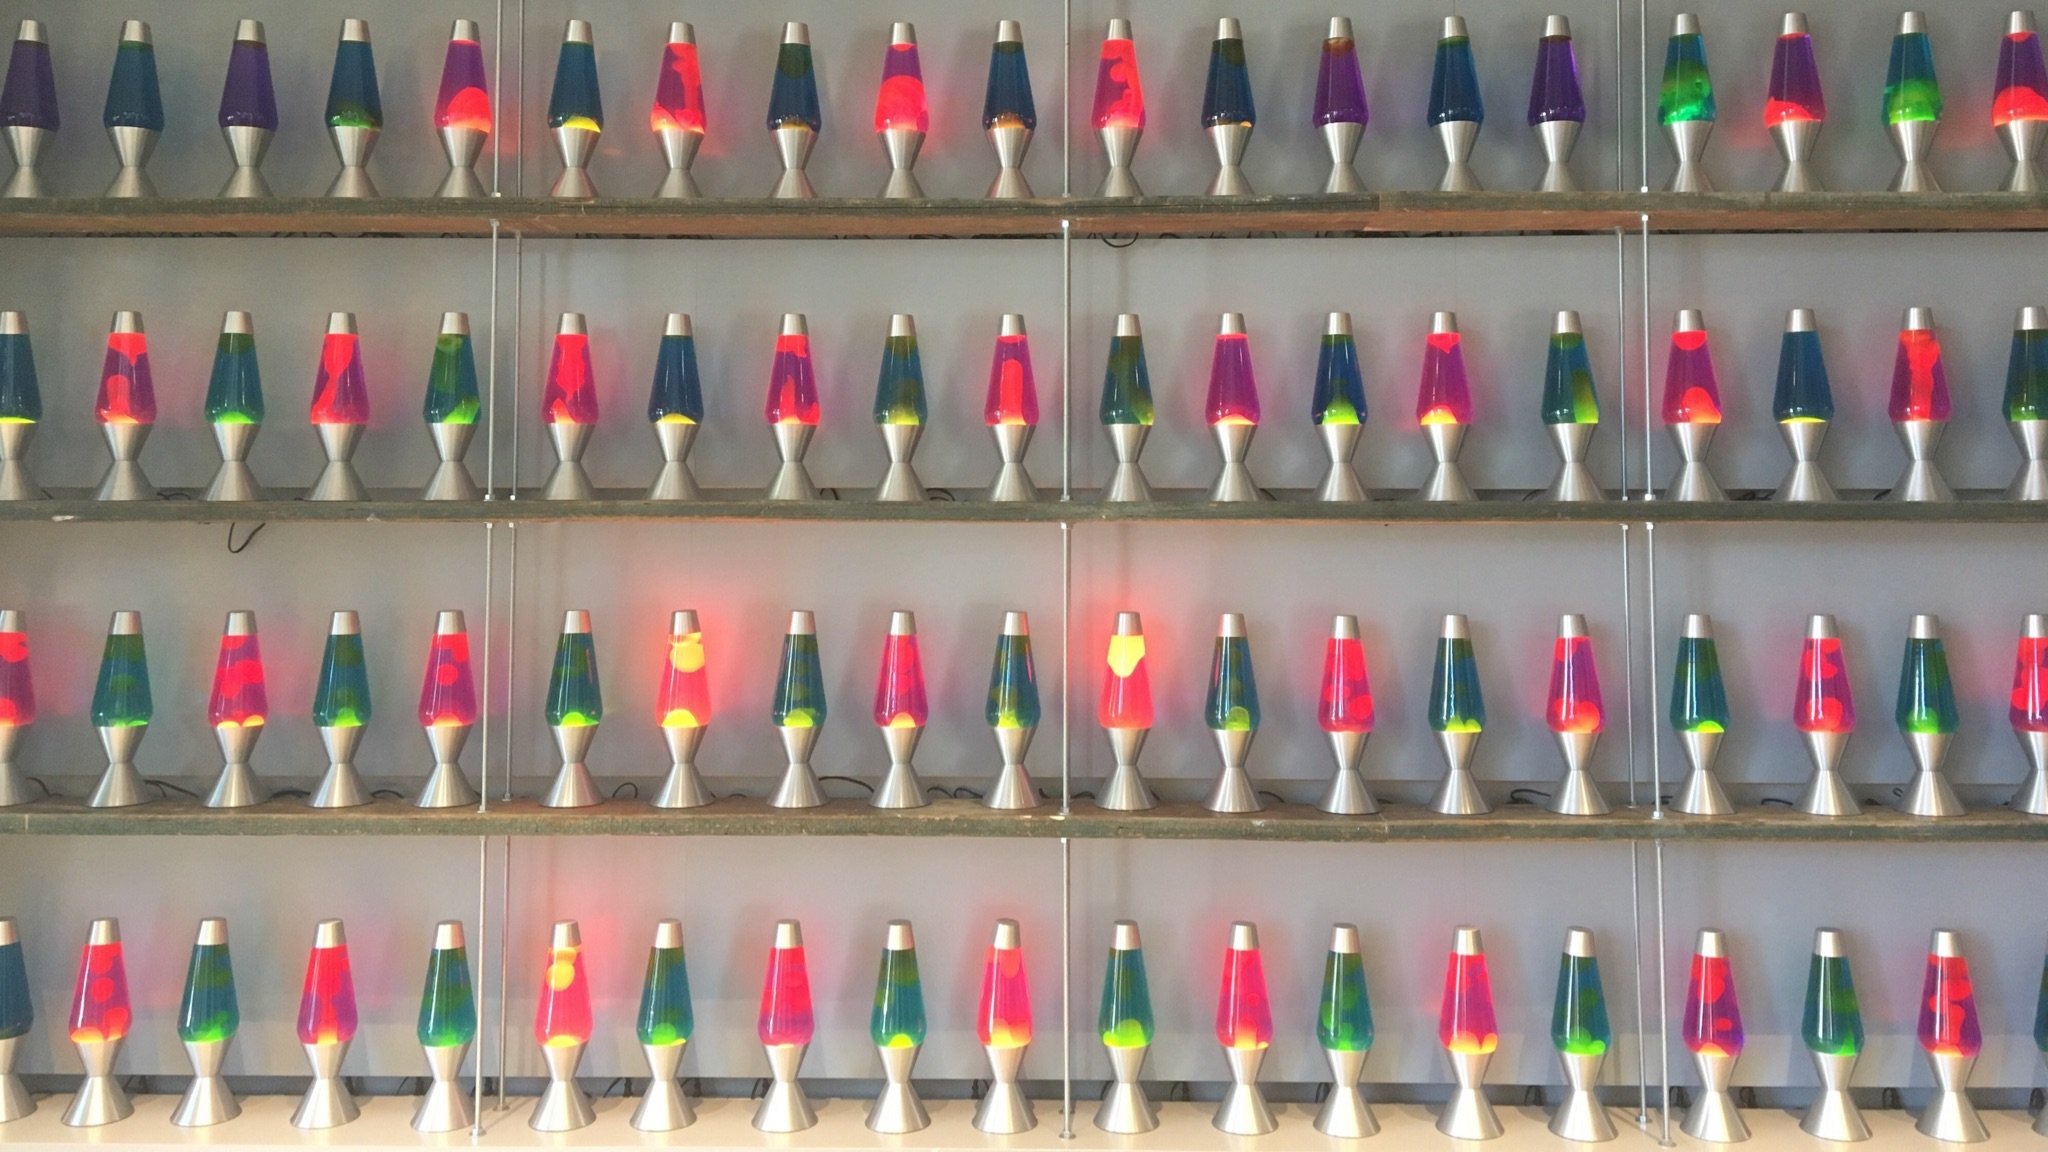 Cloudflare Has A Wall Full Of Lava Lamps For Encryption